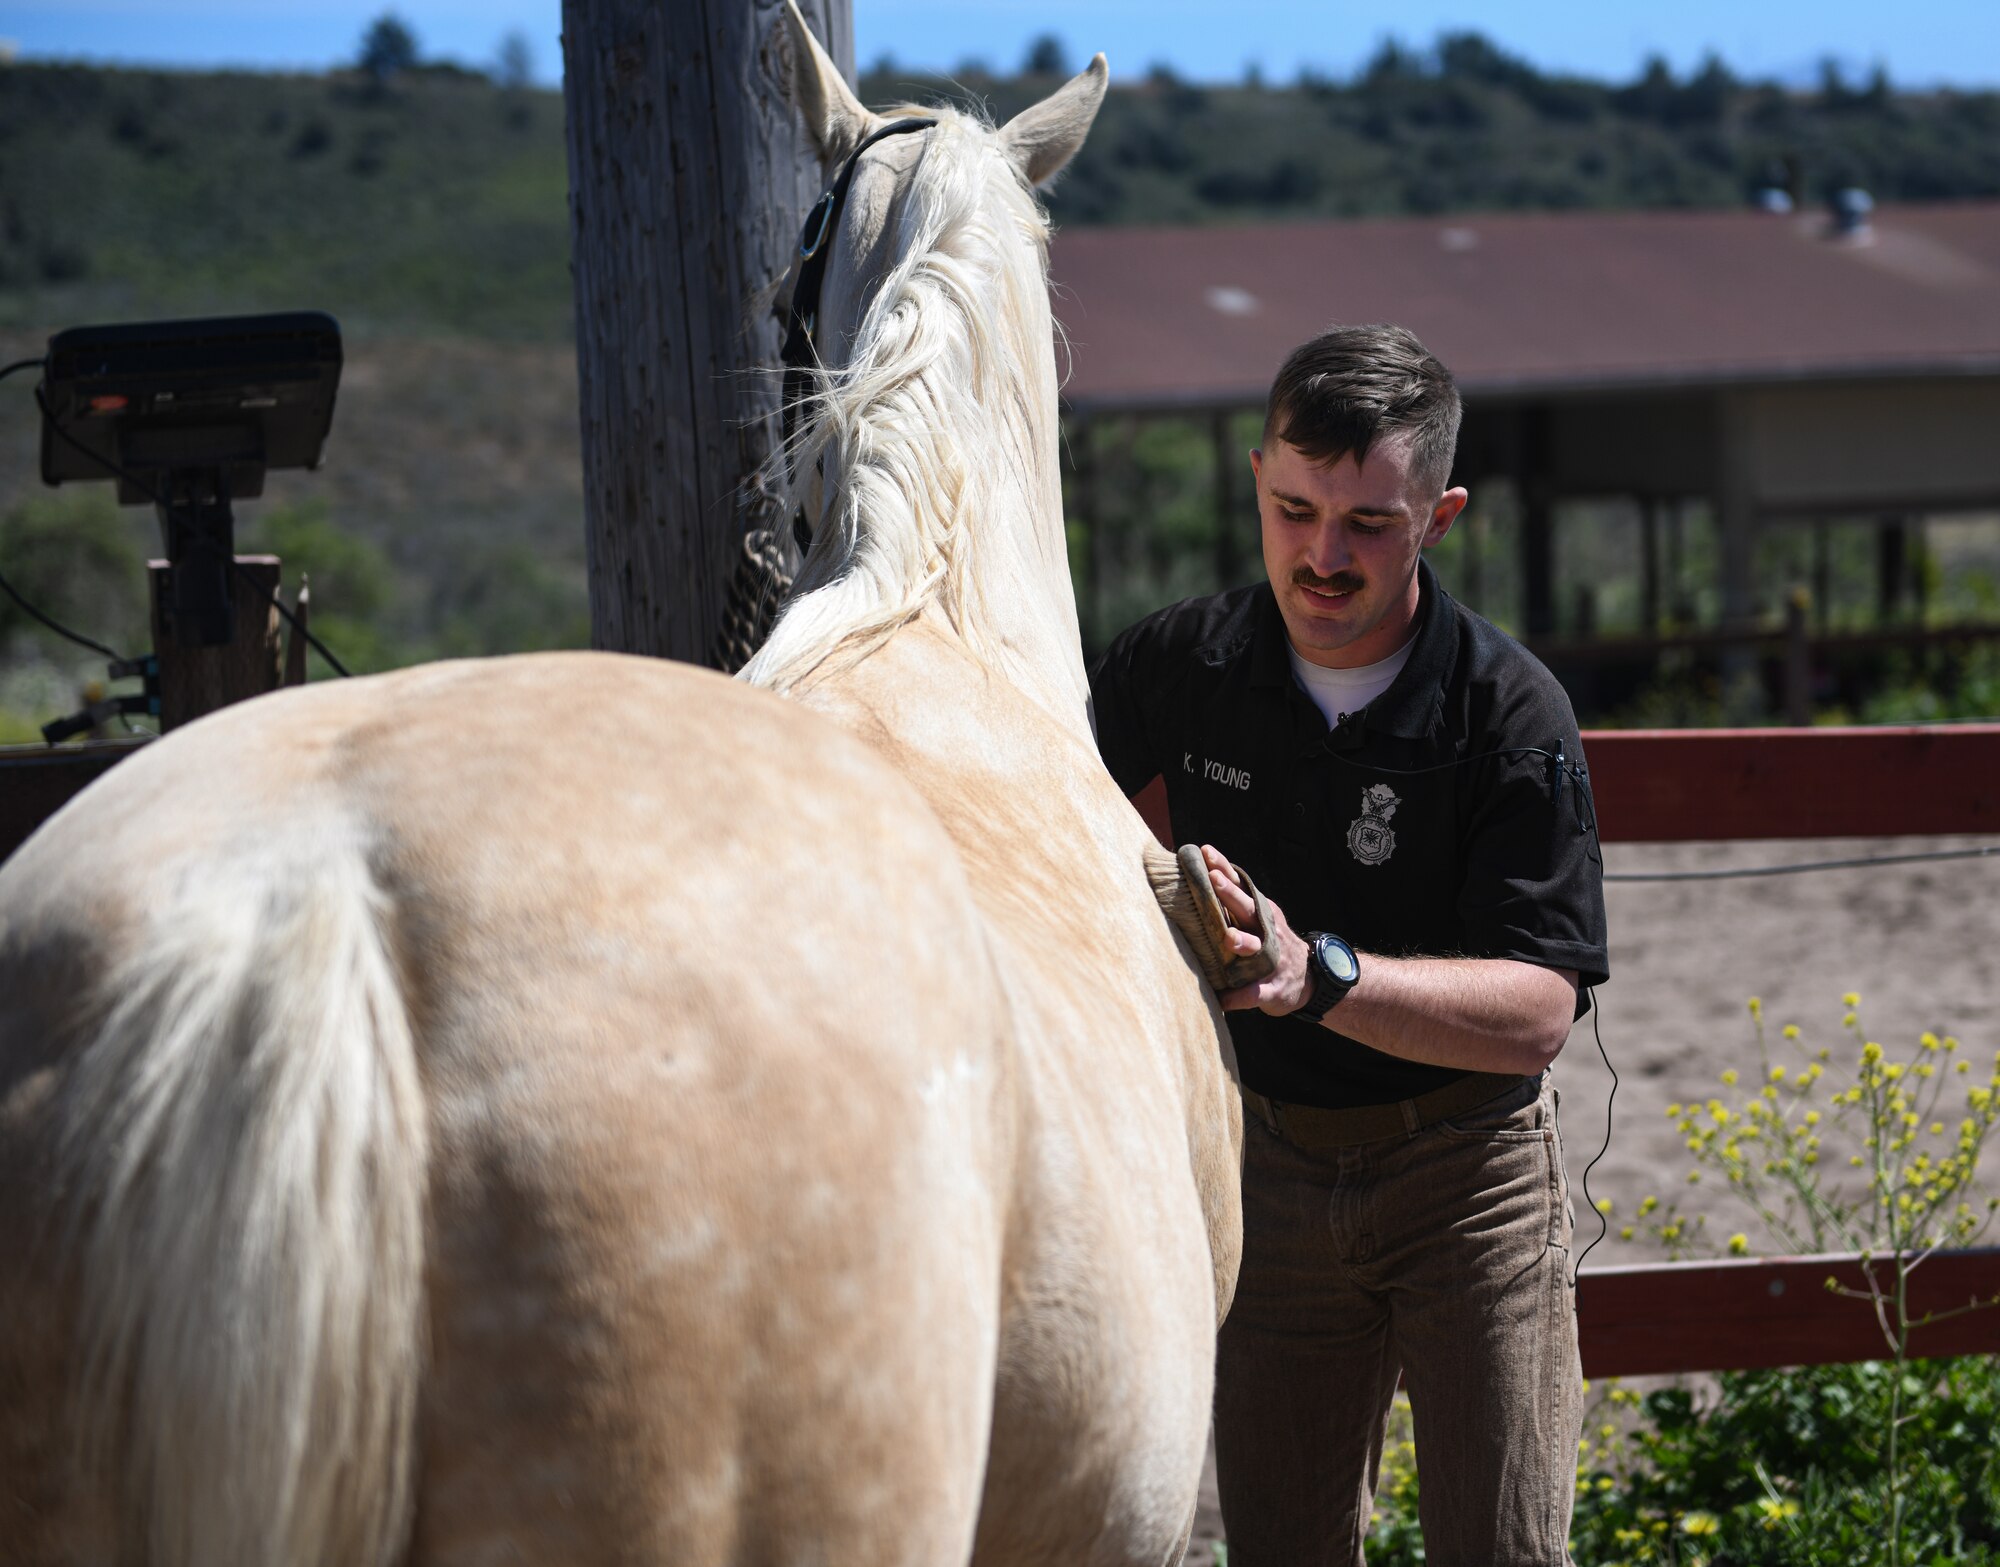 Staff Sgt. Kyle Young, 30th Security Forces Squadron conservation patrolman, brushes military working horse Patton’s coat outside the stables on Vandenberg Space Force Base, Calif., May 9, 2022. The military working horse program will be retired on Vandenberg July 28, 2022. (U.S. Space Force Photo by Airman 1st Class Ryan Quijas)